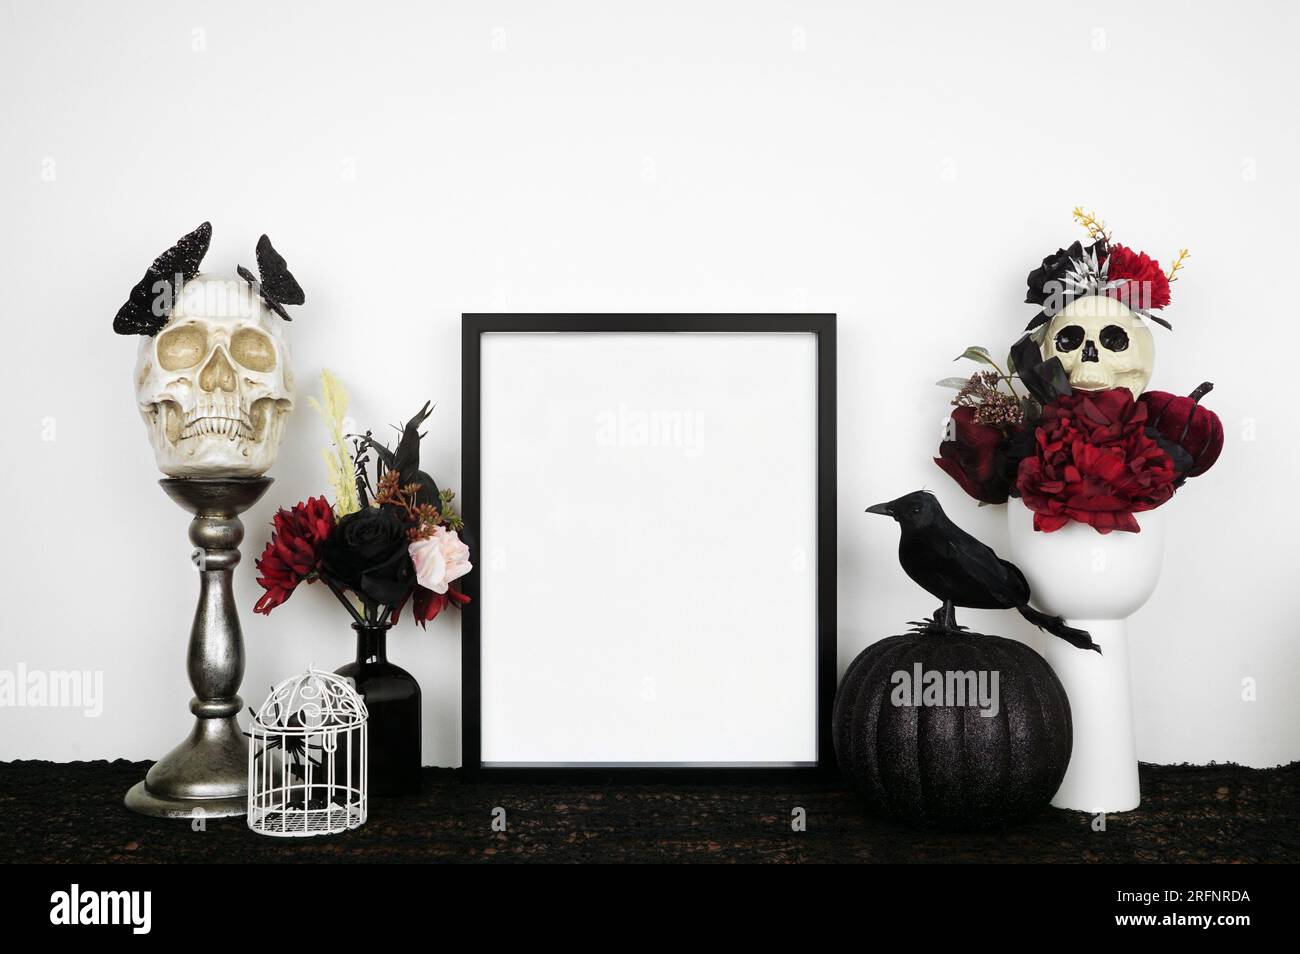 Halloween gothic romance mock up. Black frame on a black shelf with red and black flowers, skulls and pumpkin. Portrait frame against a white wall. Co Stock Photo